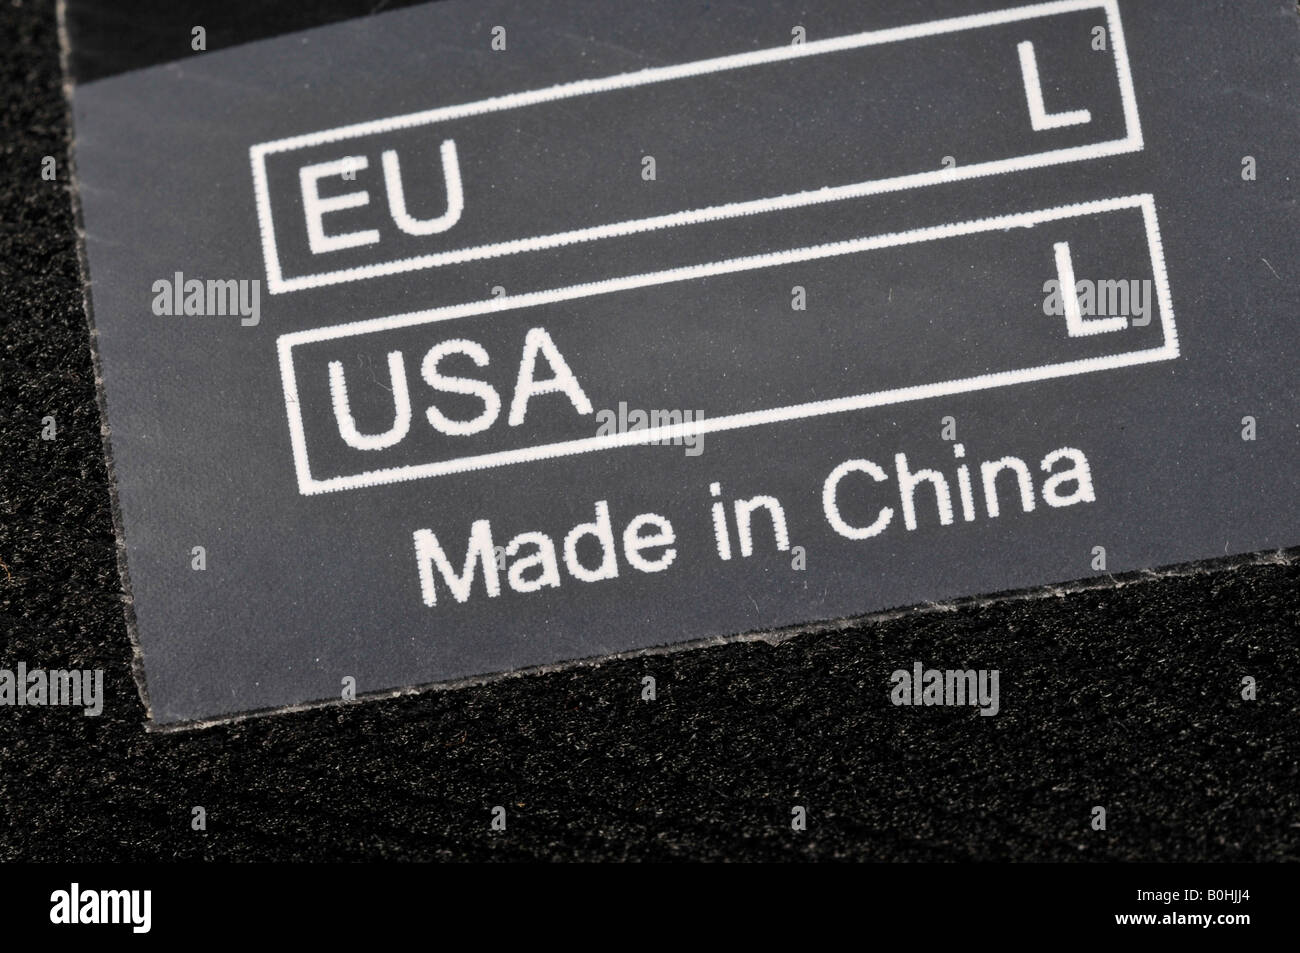 Clothes label: EU Large, USA Large, Made in China Stock Photo